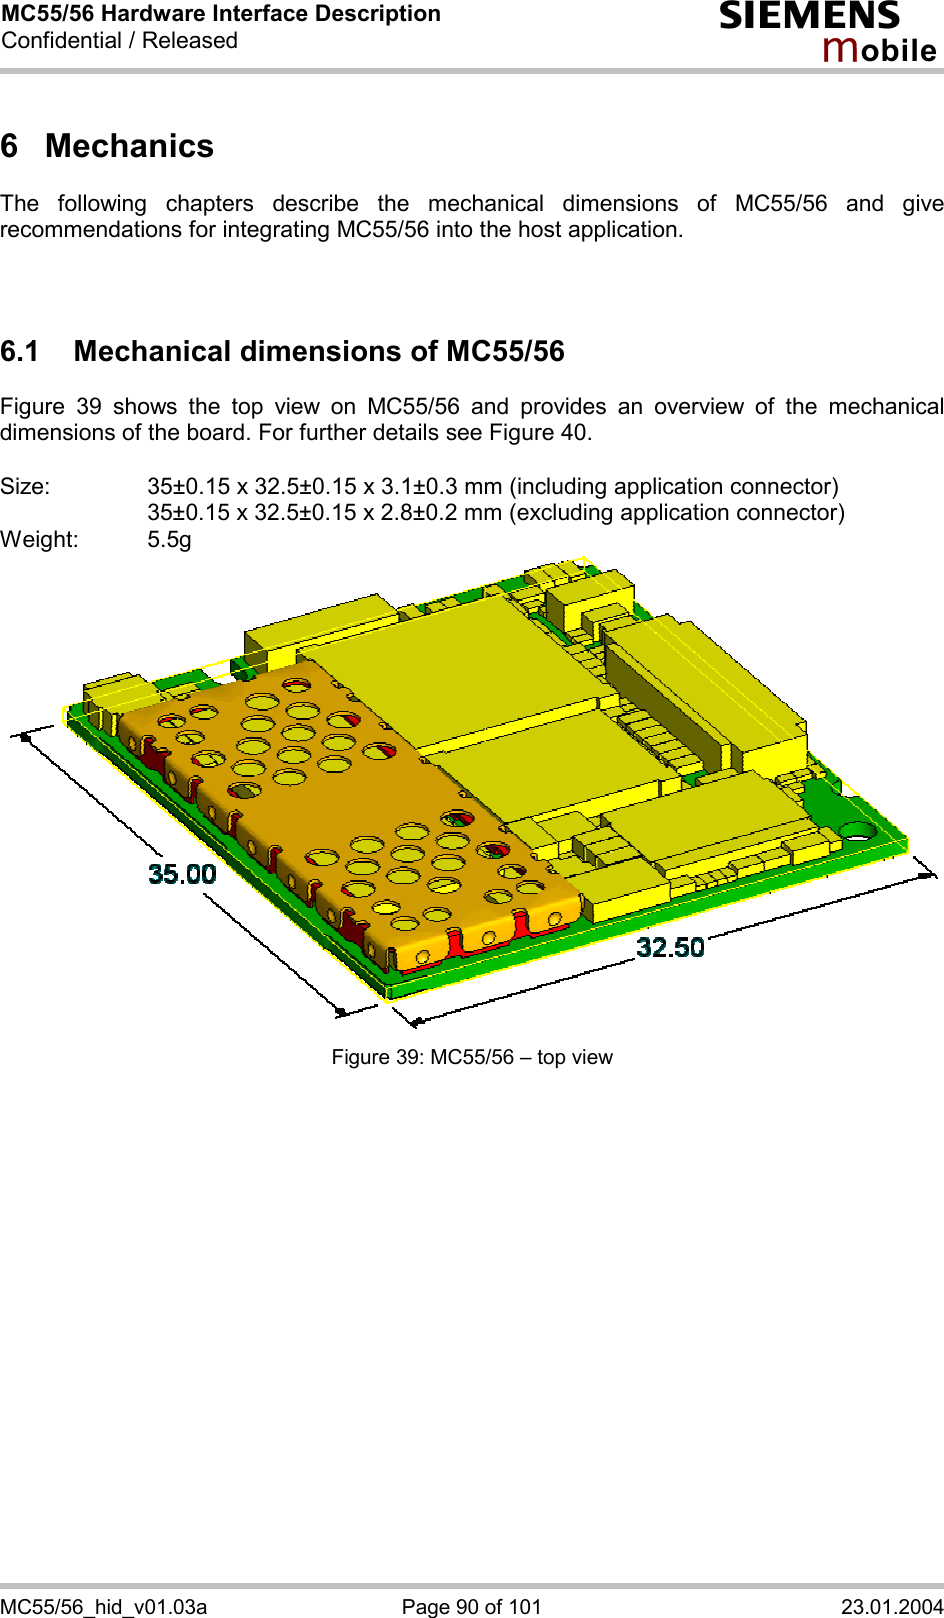 MC55/56 Hardware Interface Description Confidential / Released s mo b i l e MC55/56_hid_v01.03a  Page 90 of 101  23.01.2004 6 Mechanics The following chapters describe the mechanical dimensions of MC55/56 and give recommendations for integrating MC55/56 into the host application.    6.1 Mechanical dimensions of MC55/56 Figure 39 shows the top view on MC55/56 and provides an overview of the mechanical dimensions of the board. For further details see Figure 40.  Size:     35±0.15 x 32.5±0.15 x 3.1±0.3 mm (including application connector)       35±0.15 x 32.5±0.15 x 2.8±0.2 mm (excluding application connector) Weight: 5.5g  Figure 39: MC55/56 – top view    